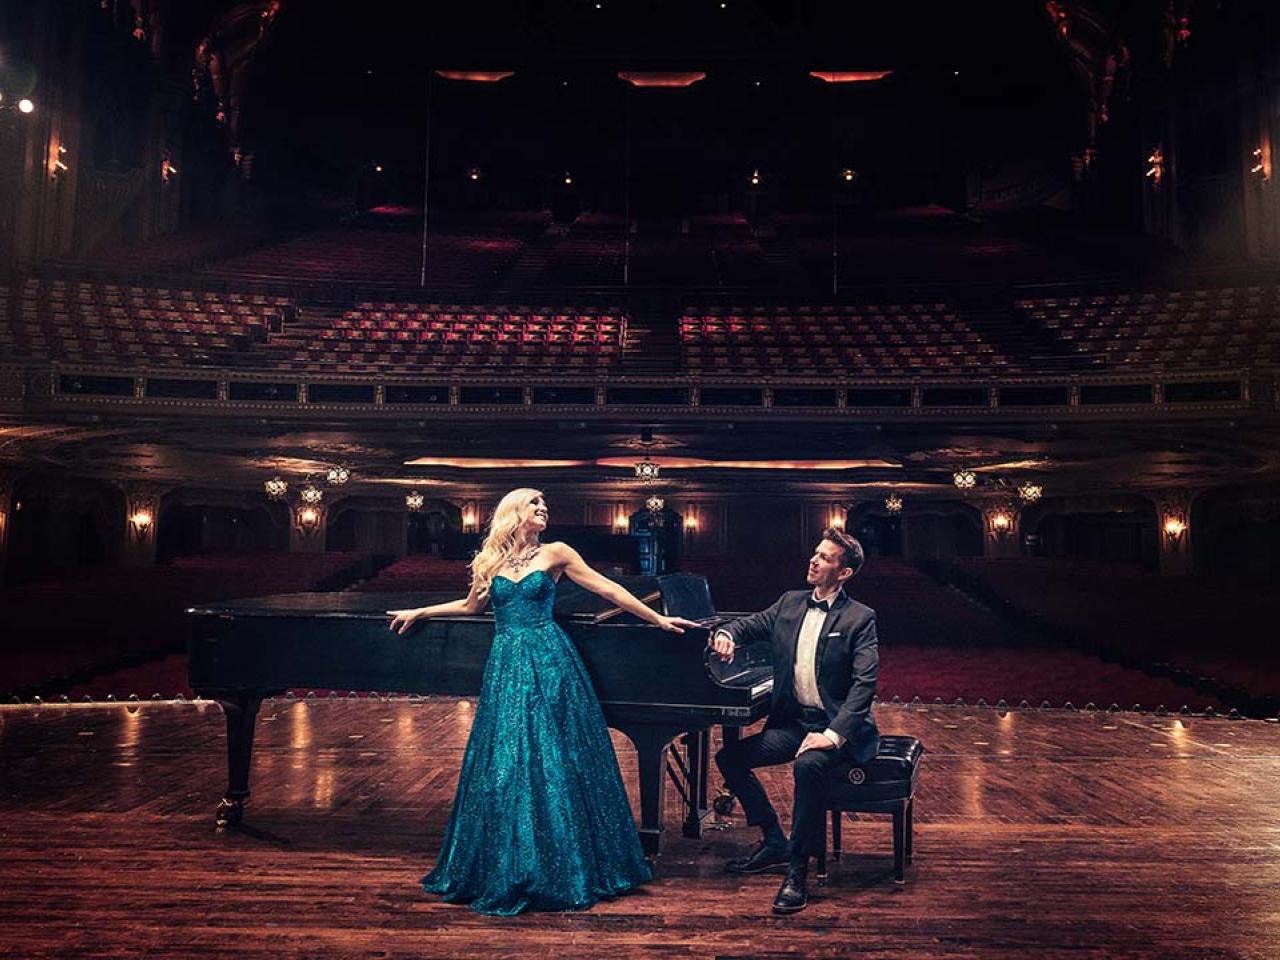 man and woman in dance pose on stage in front of piano